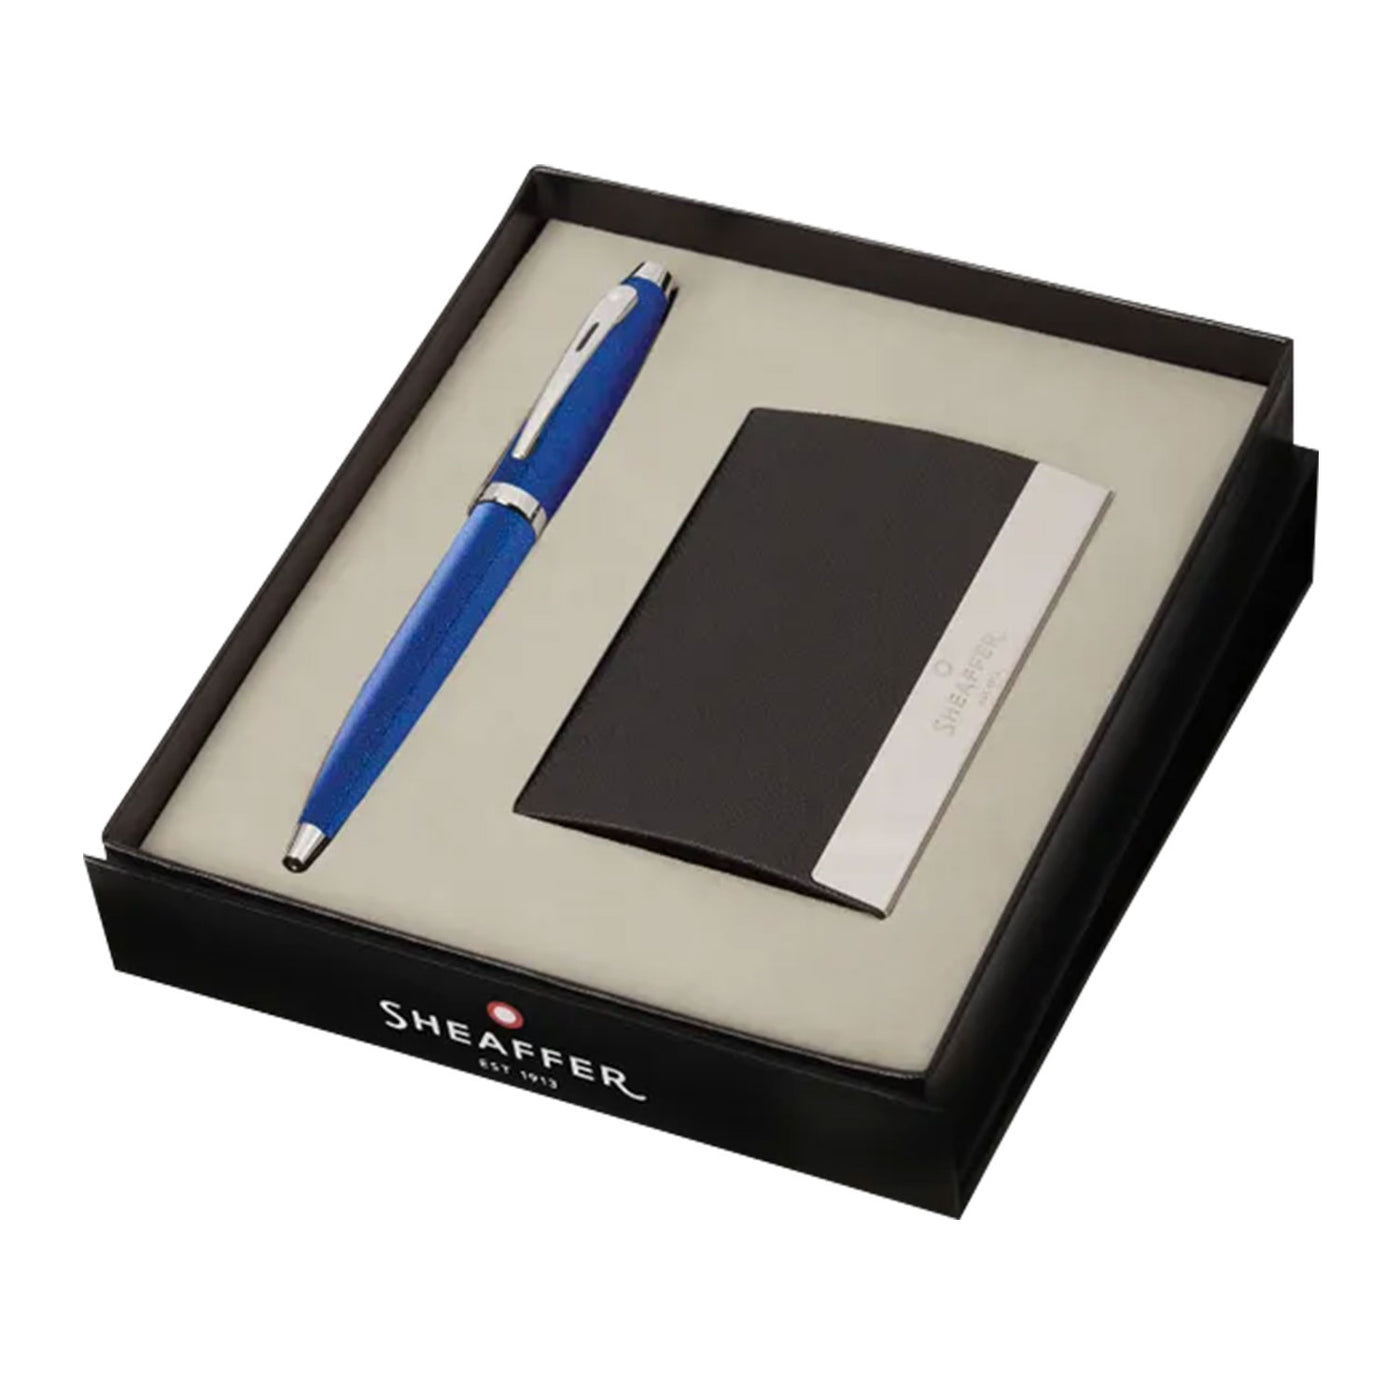 Sheaffer Gift Set - 100 Series Glossy Blue CT Ball Pen with Business Card Holder 1